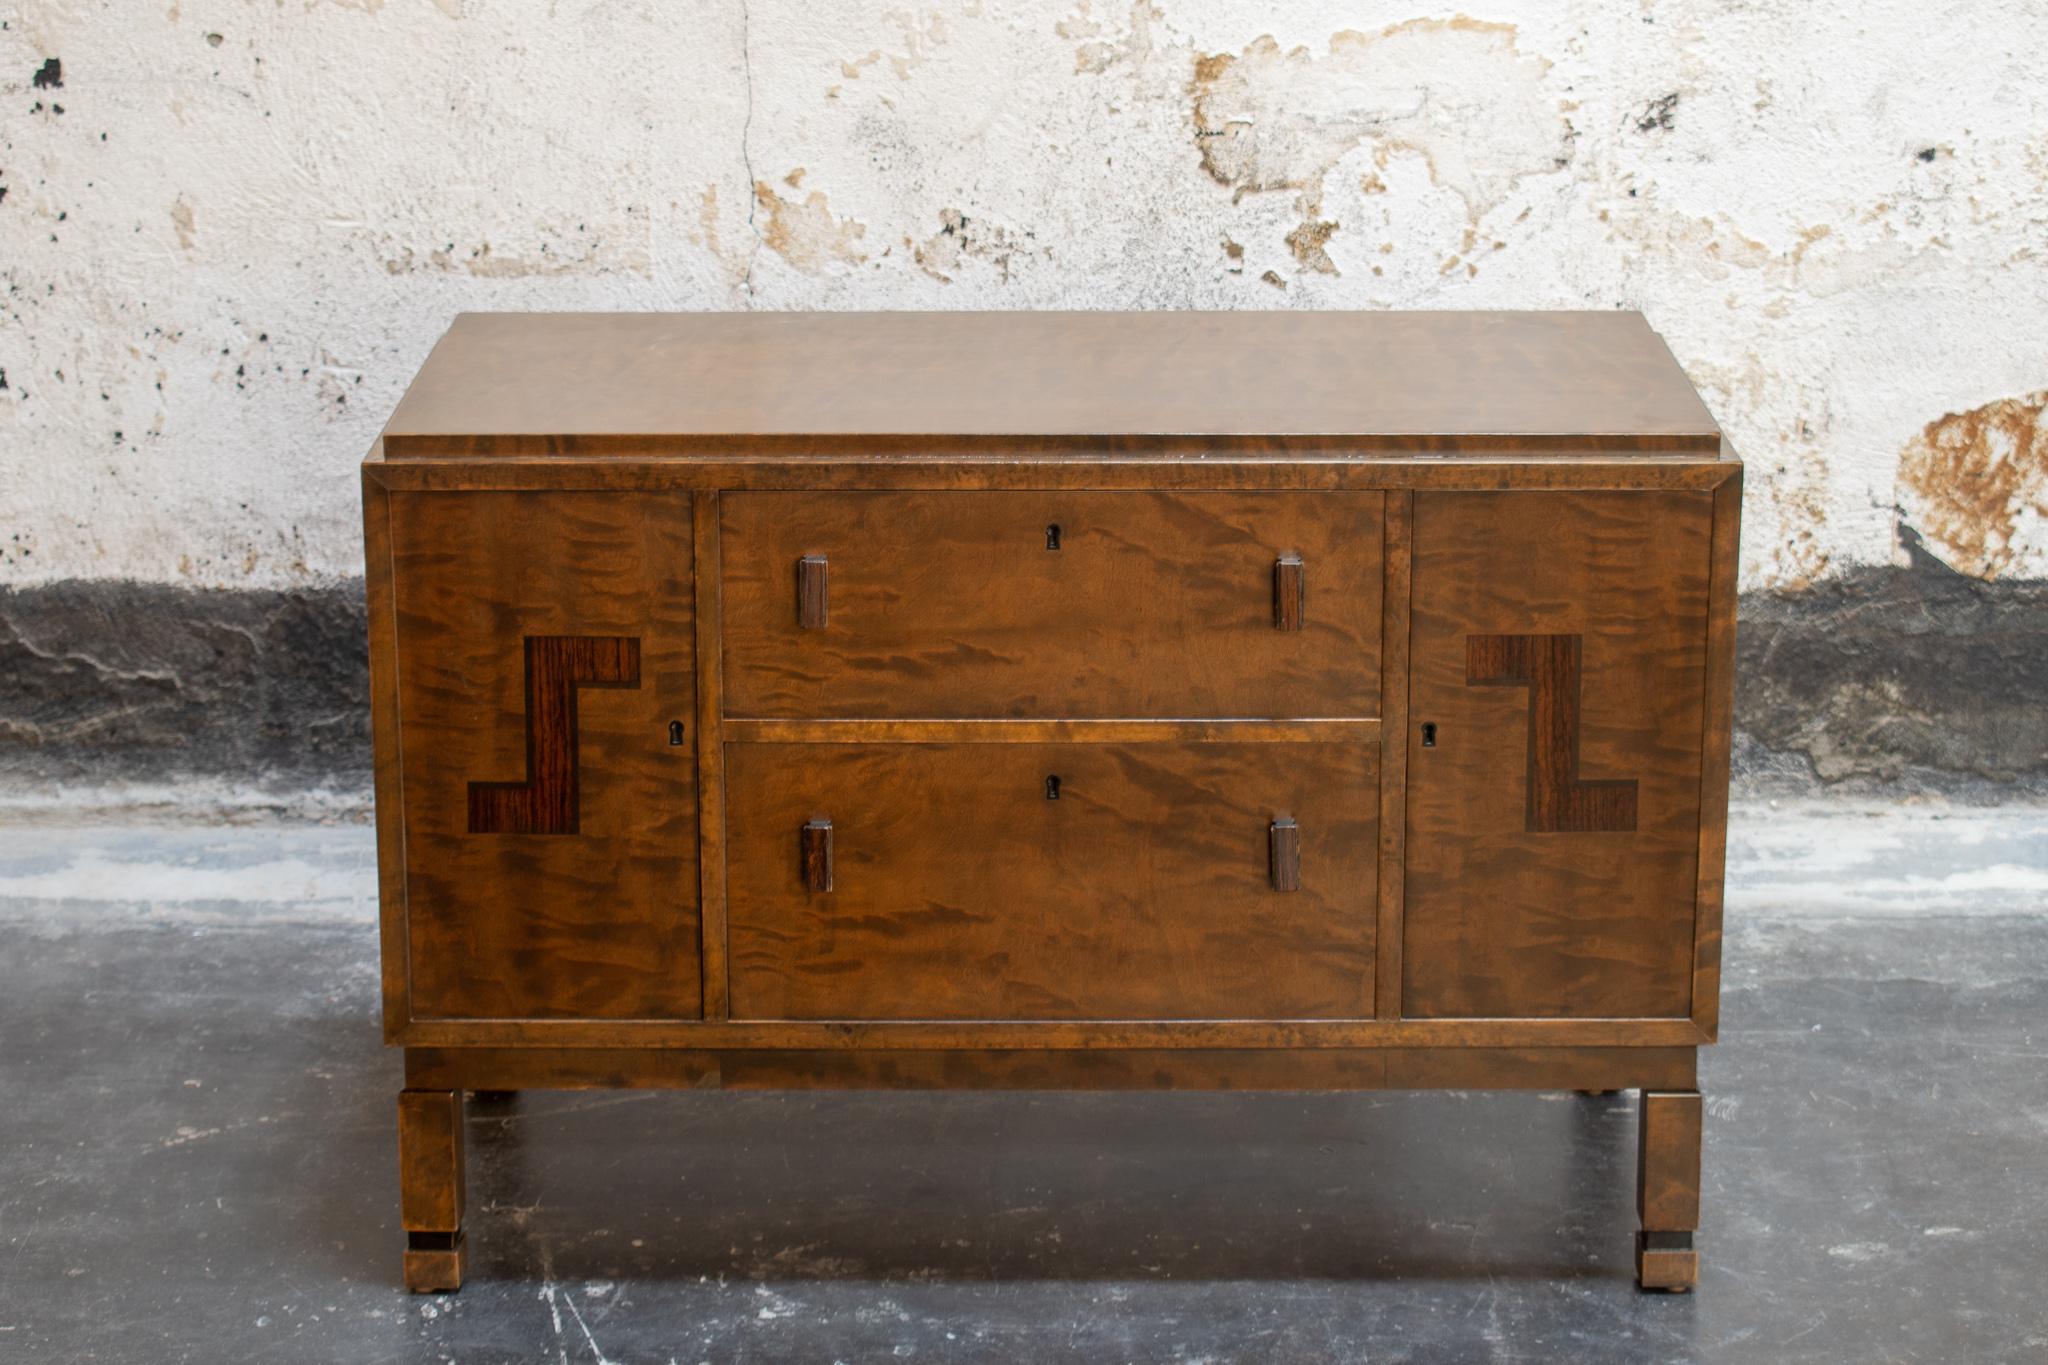 Antique Swedish Art Deco chest with rosewood inlay. This versatile piece features two deep drawers, two cabinet doors, with a shelf in the right cabinet. Original key included.